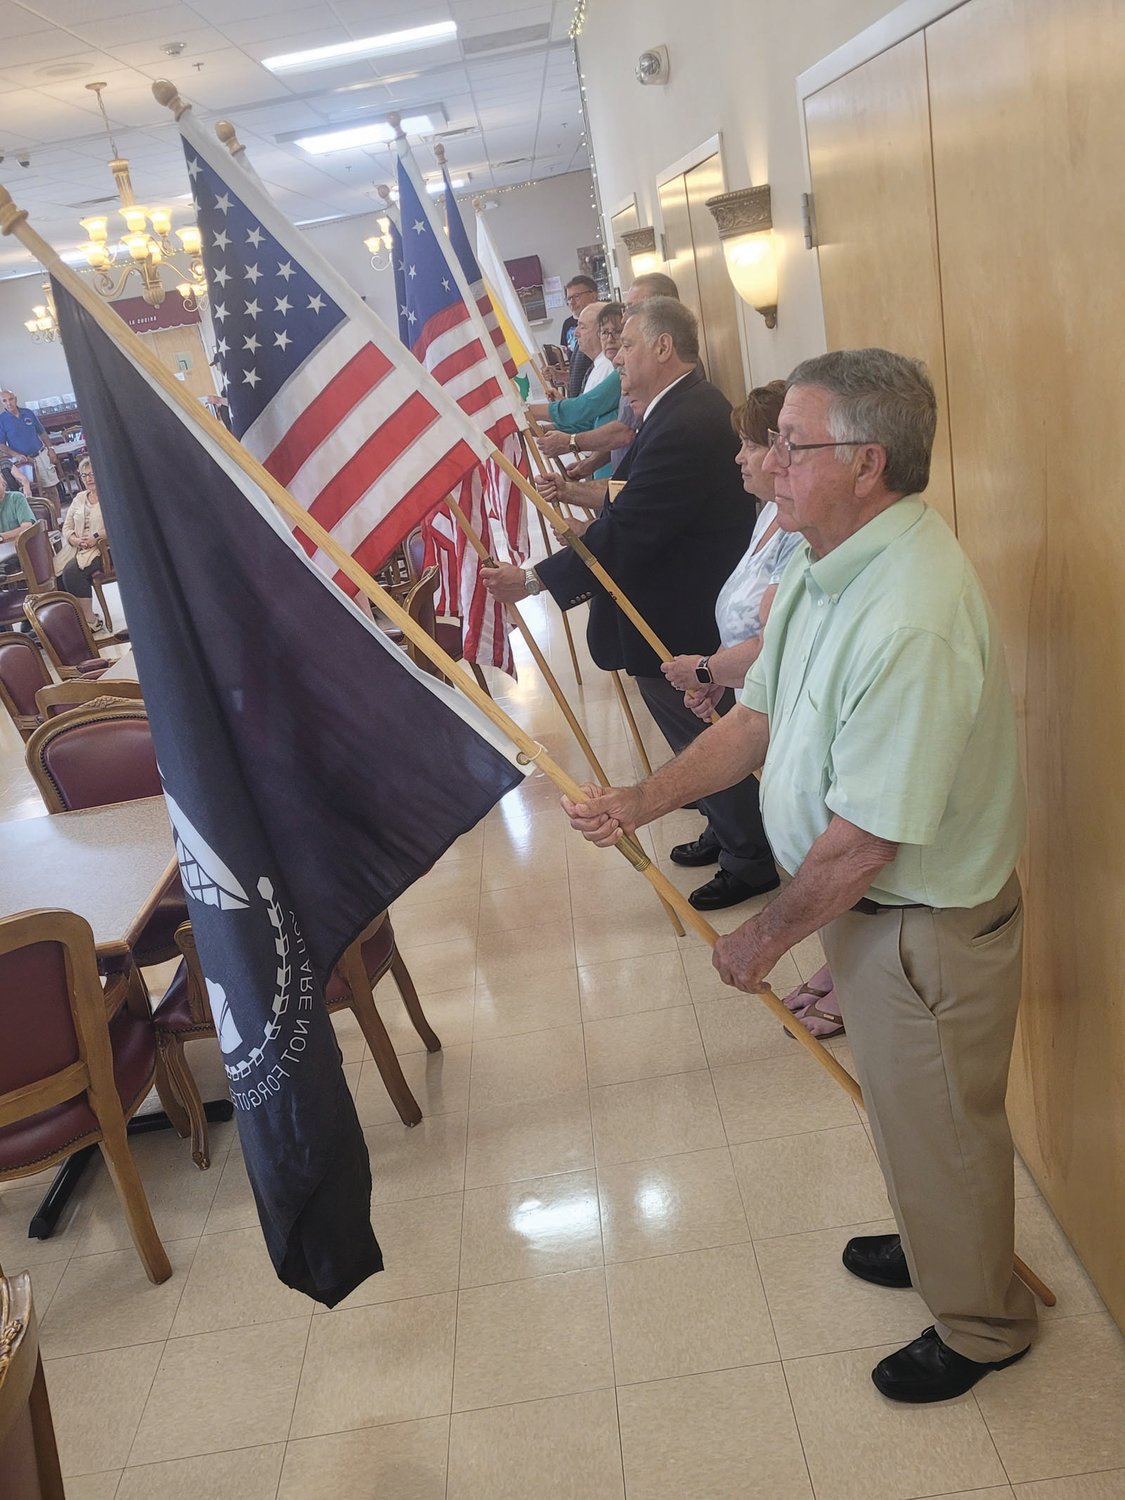 BANNERS UNITED: Members of Warwick’s Tri-City Elks Lodge held flags from throughout the American experience. From the original “Stars & Stripes” to an “MIA/POW” flag, patriotism was on full display during the Flag Day ceremony held at the Johnston Senior Center.